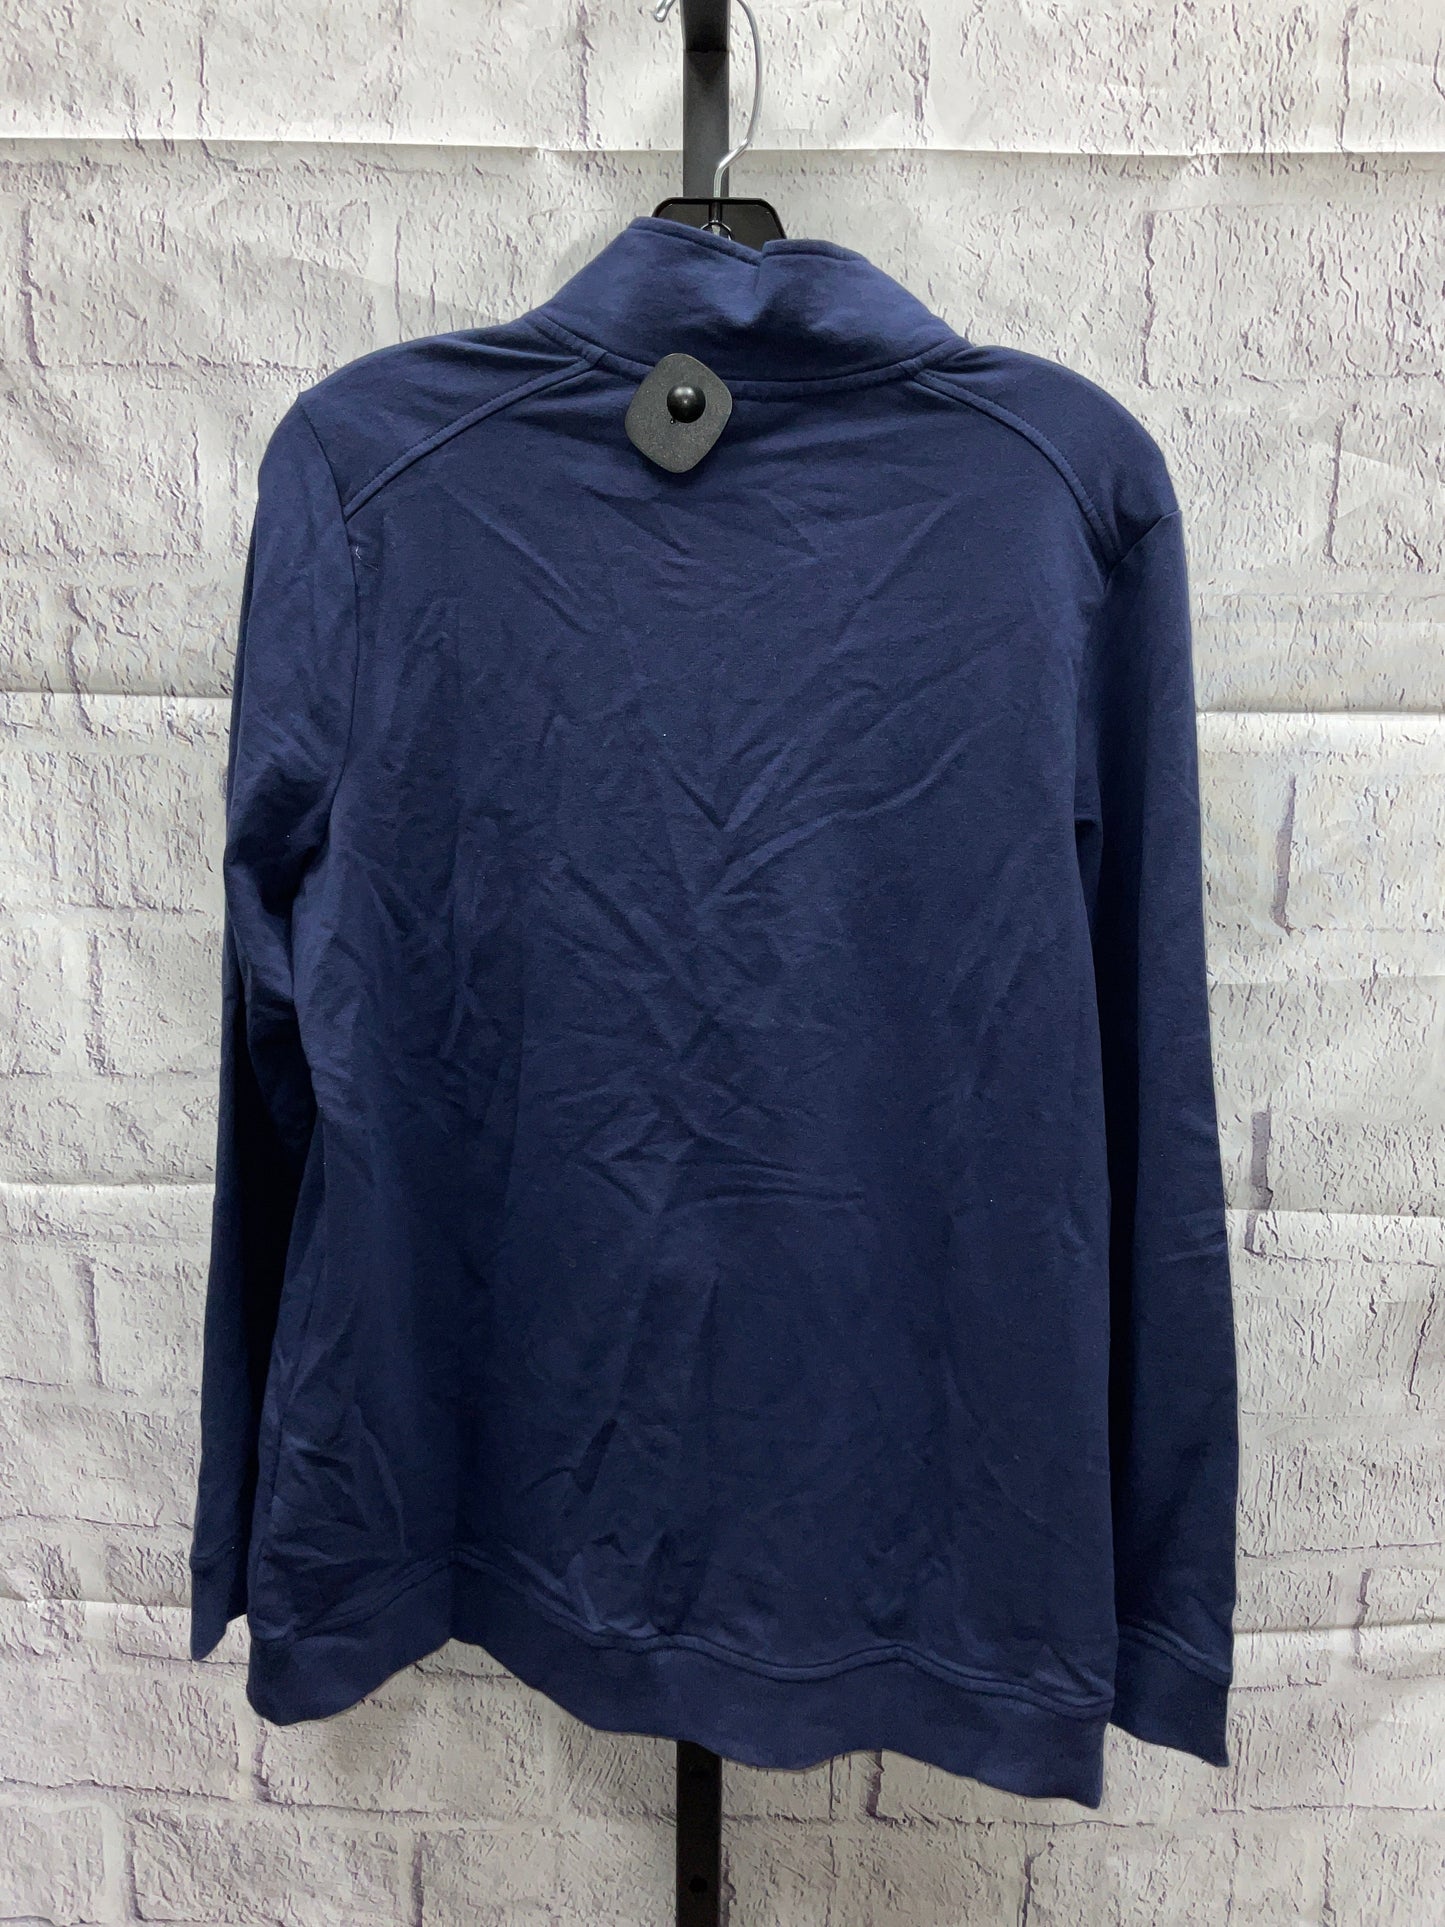 Athletic Top Long Sleeve Crewneck By Denim And Company  Size: S